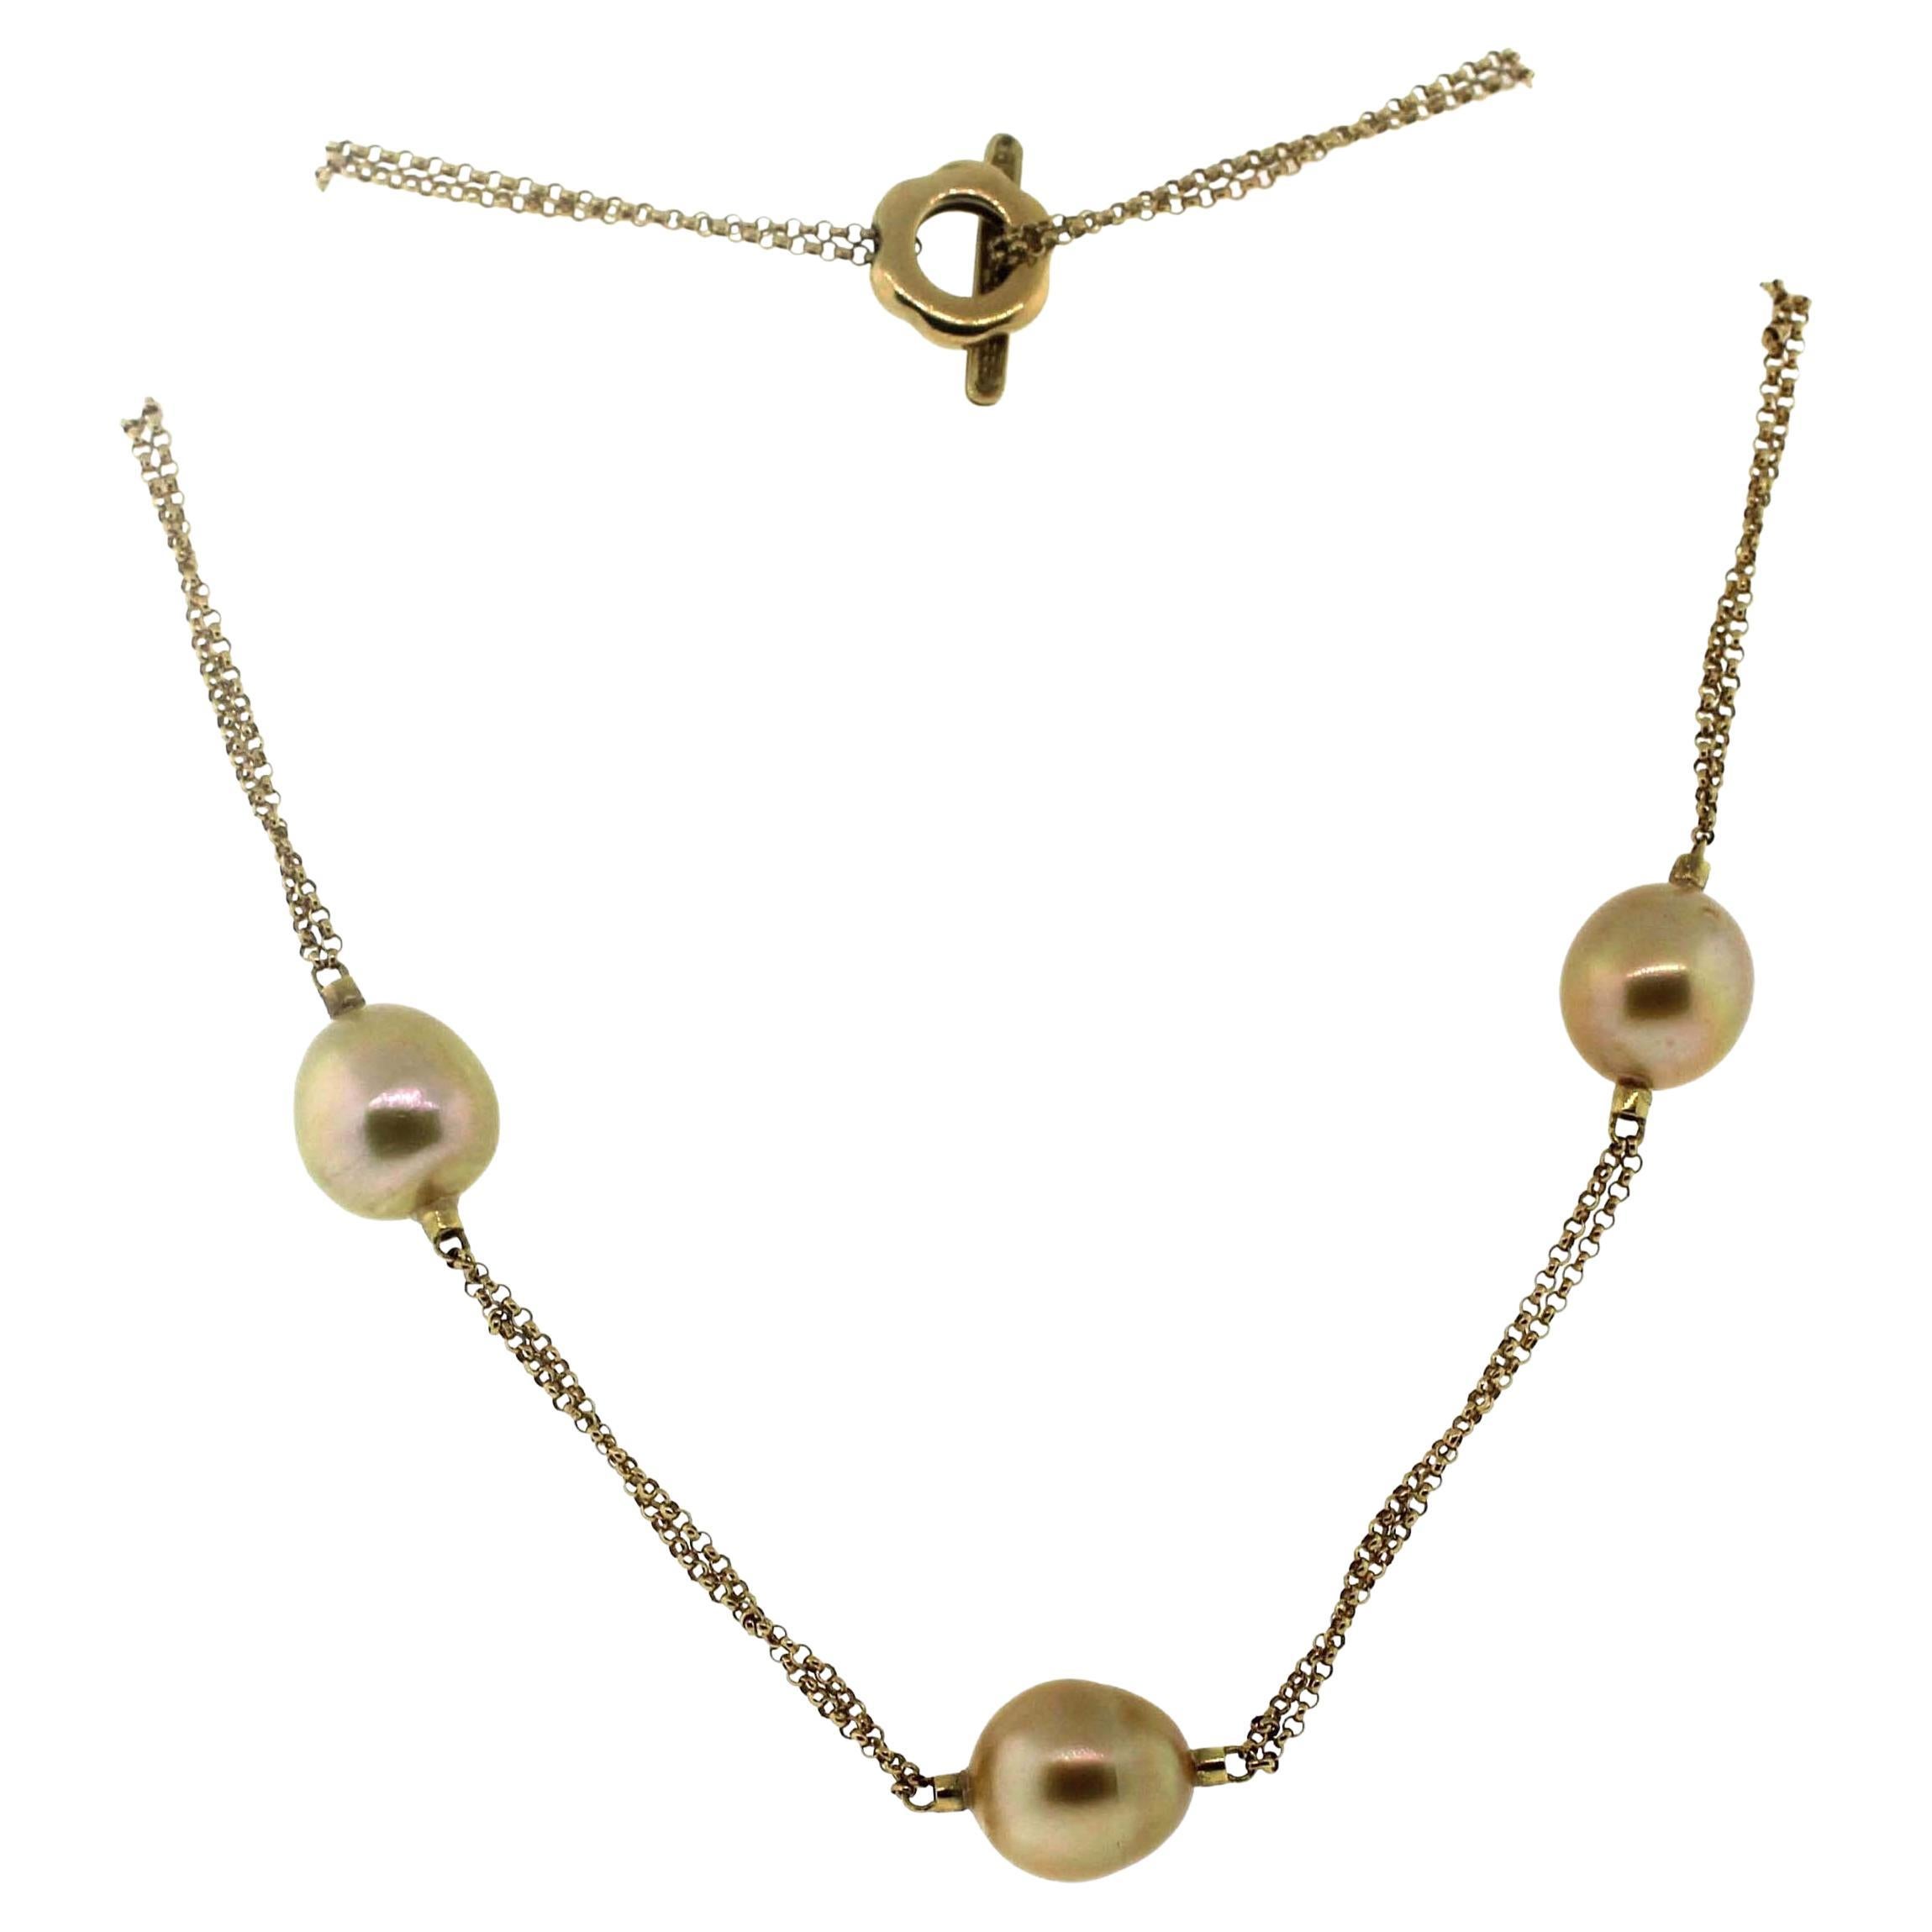 Hakimoto By Jewel Of Ocean Station Necklace
A classic and wearable Natural Color South Sea Station Baroque pearl necklace. 
The necklace is Made with 7 Baroque South Sea Pearls size 12mm. 
The pearls are connected by 18 karat Yellow gold 18k Italian